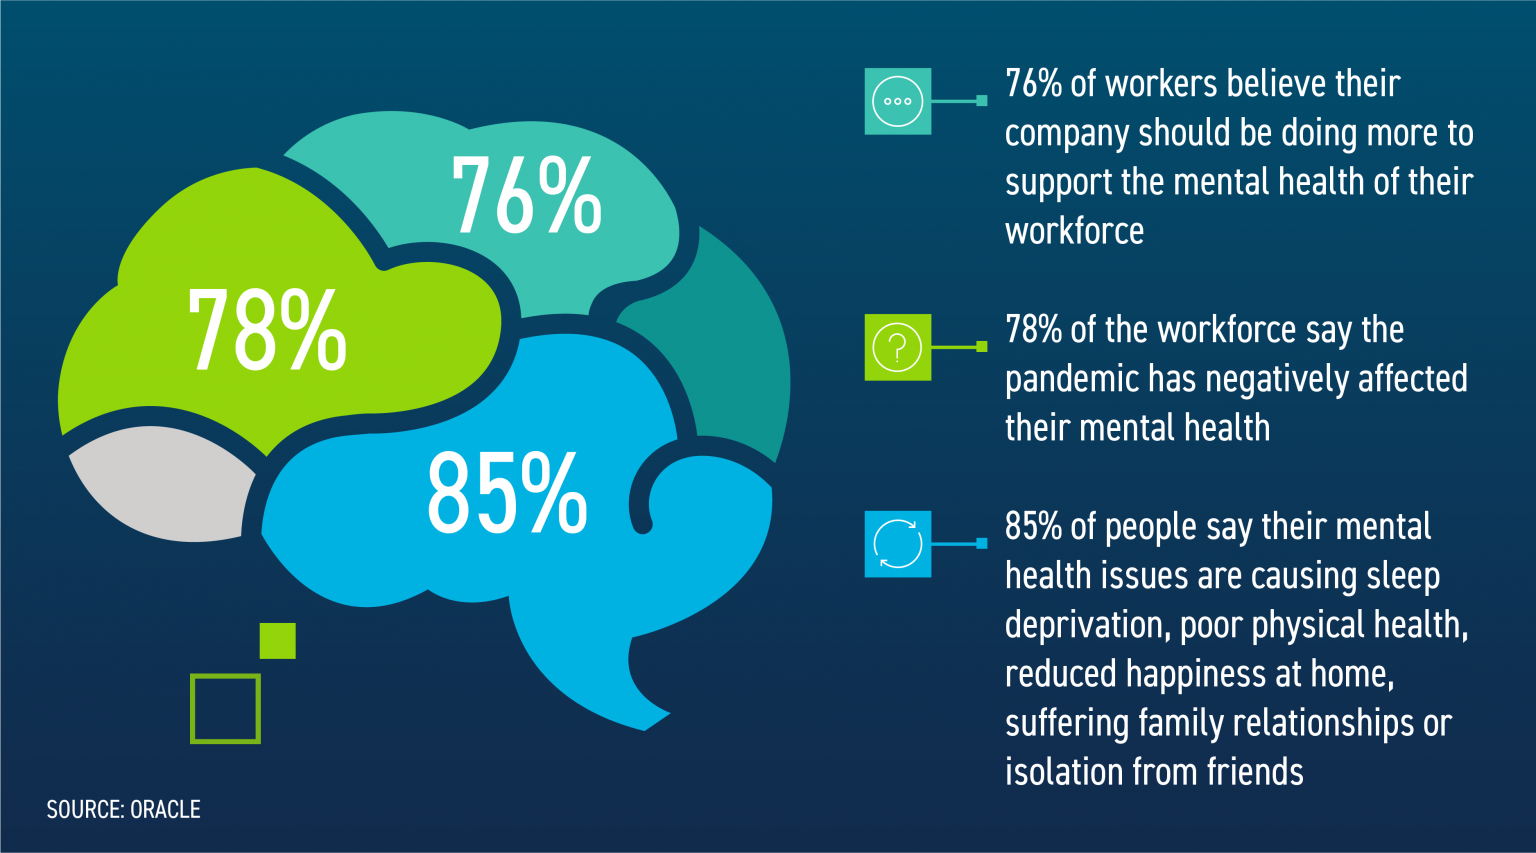 case study on mental health in the workplace